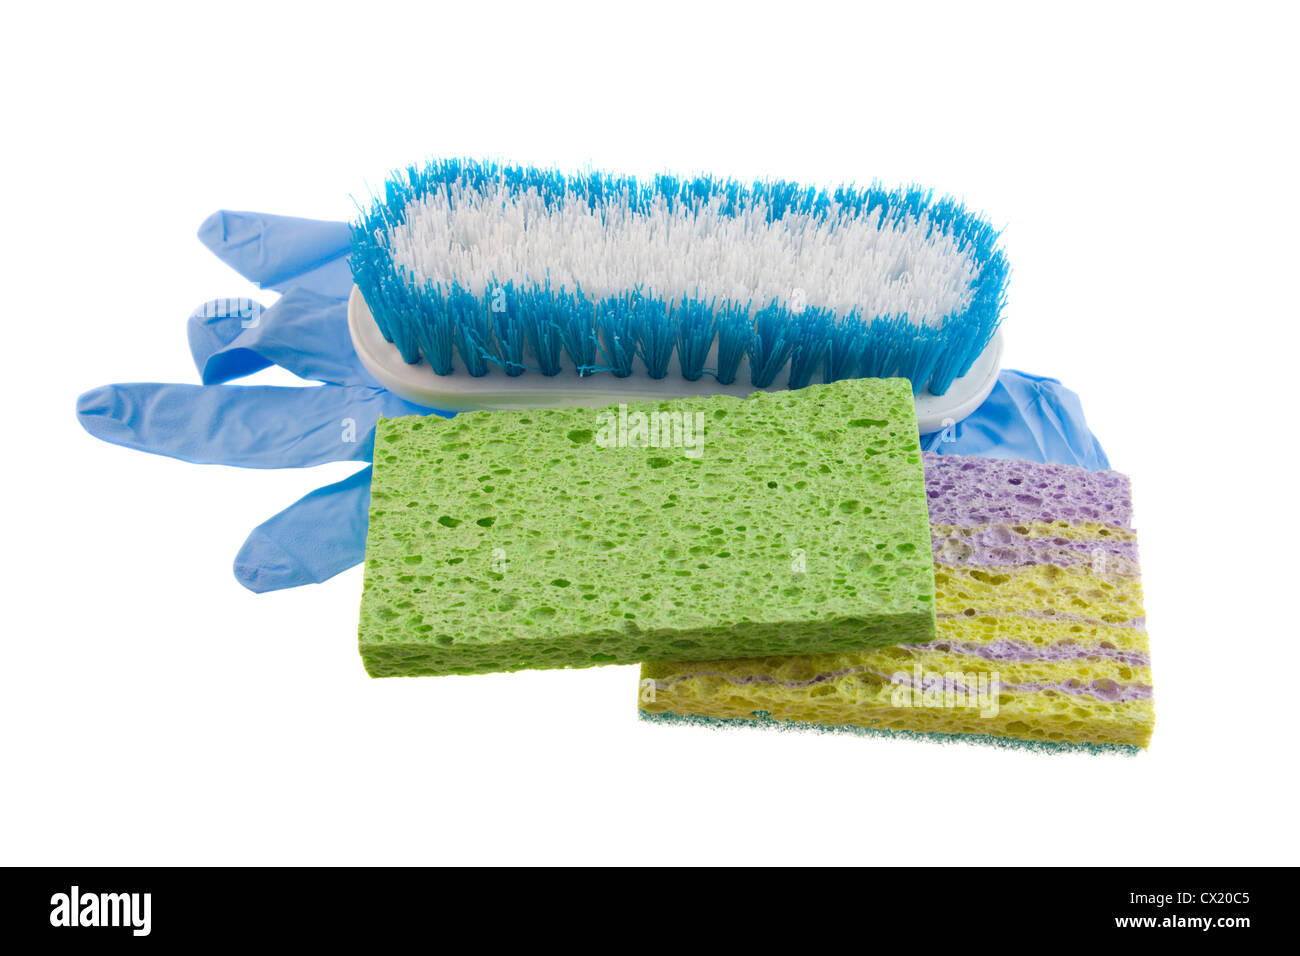 two cleaning sponges, blue and white scrub brush and a disposable glove isolated on white Stock Photo